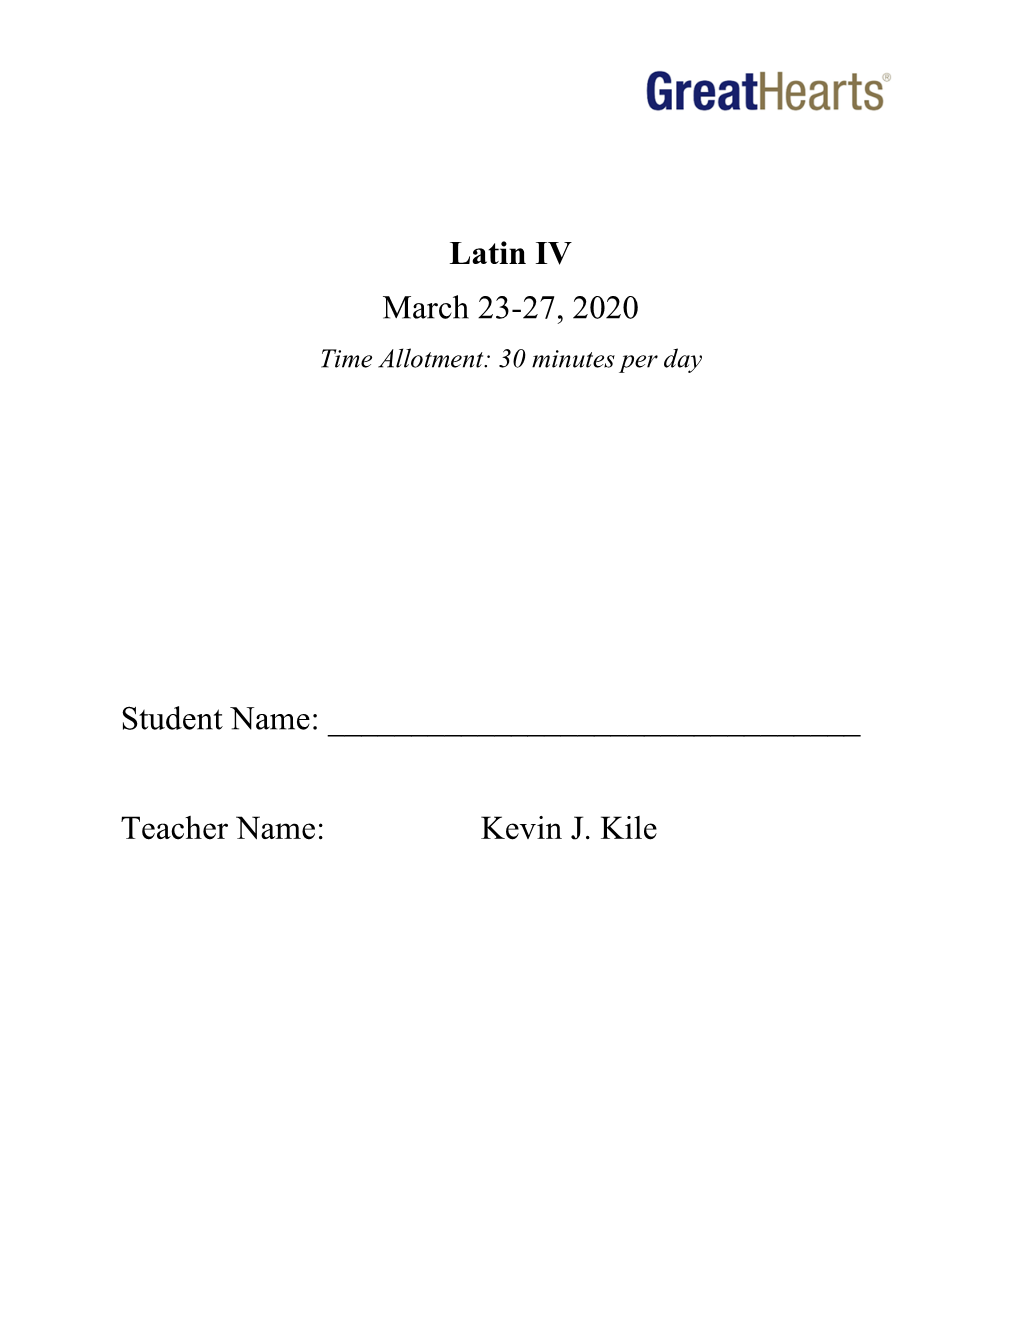 Latin IV March 23-27, 2020 Time Allotment: 30 Minutes Per Day